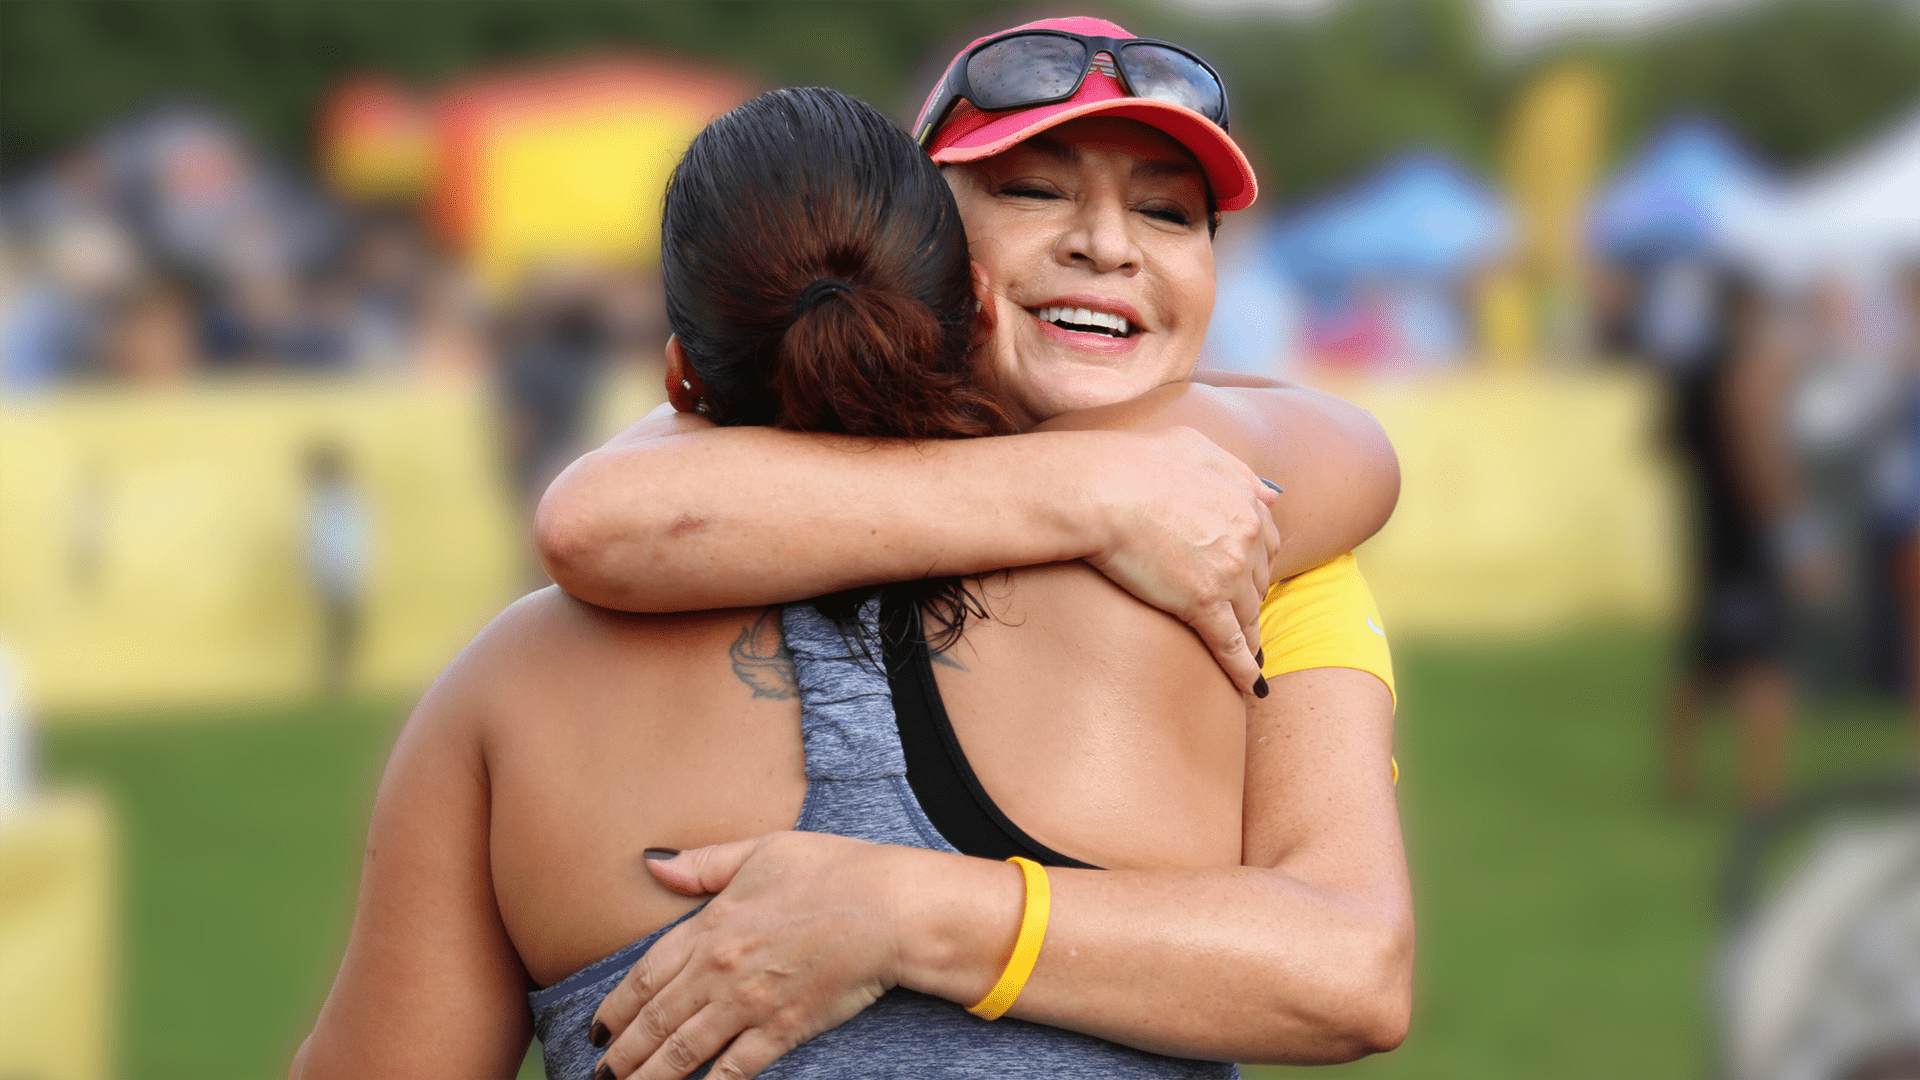 Two women in athletic clothing share a hug